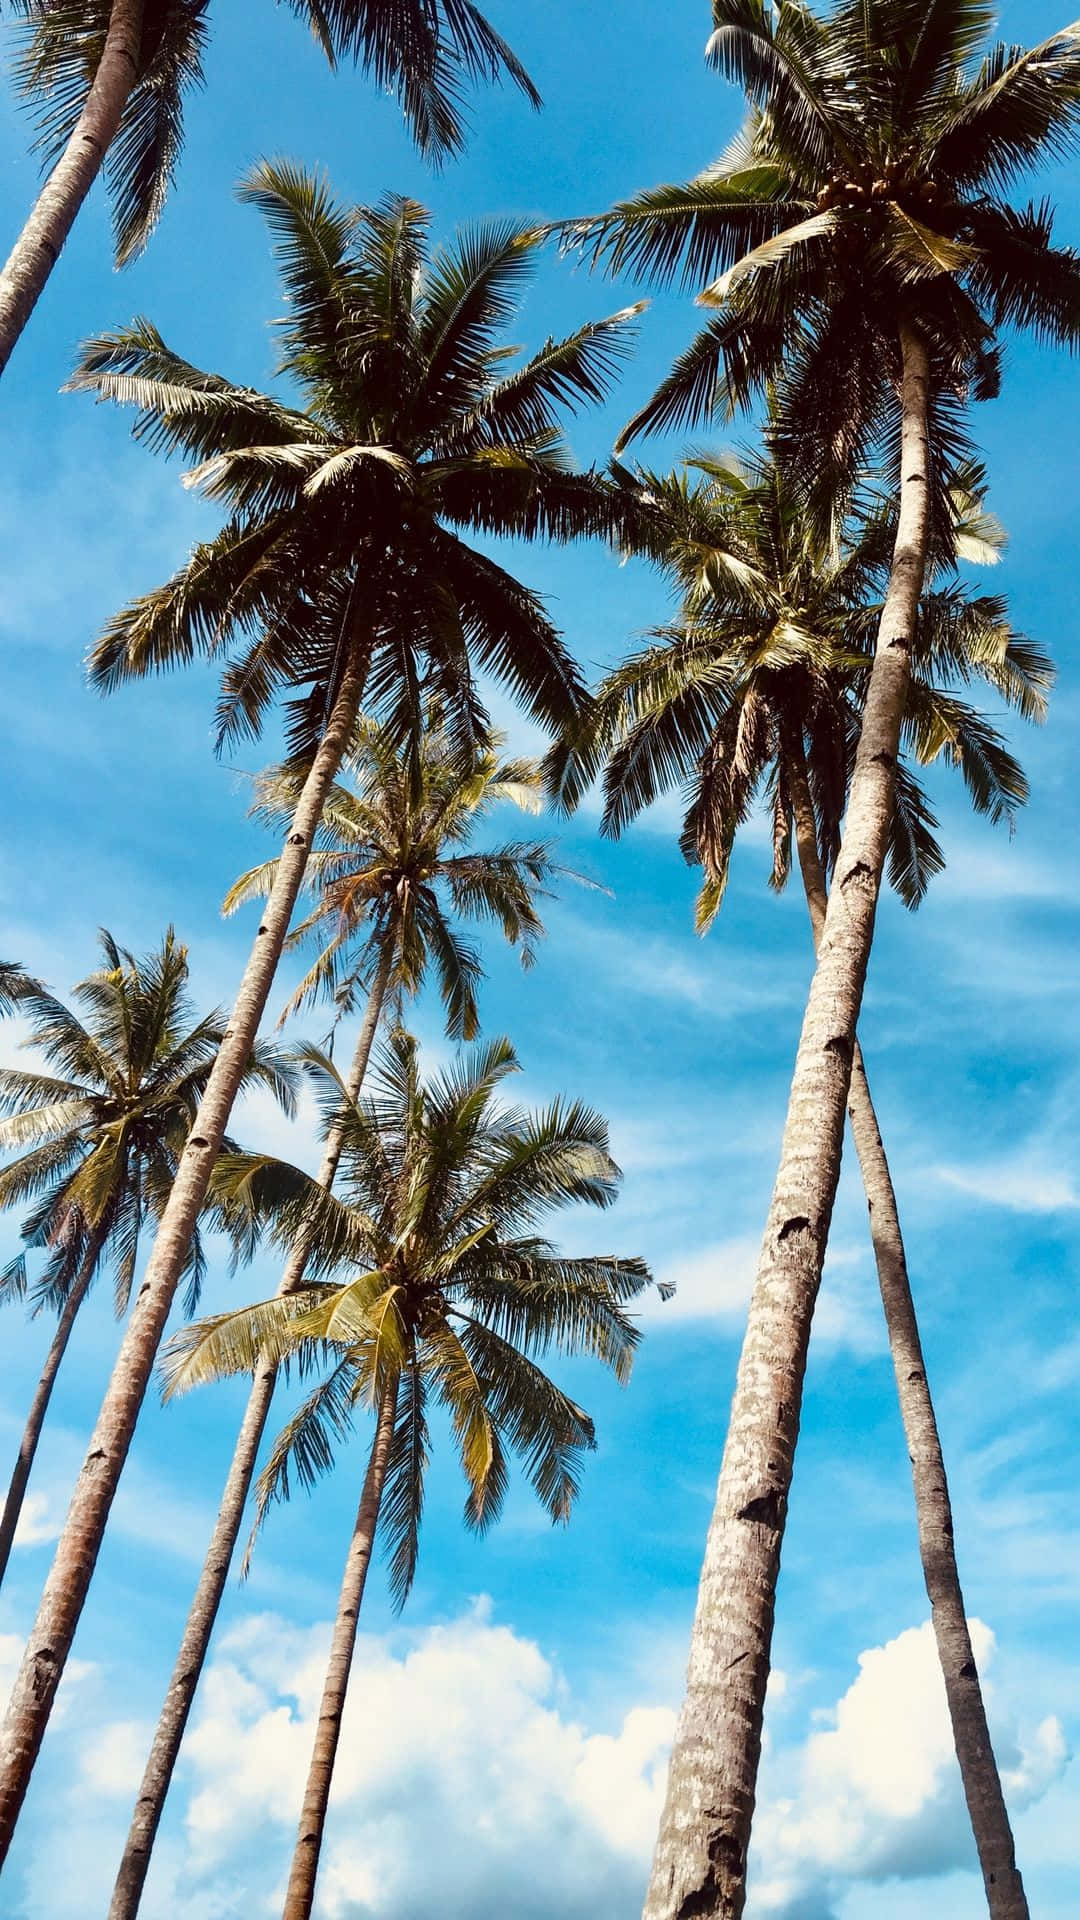 Palm trees on a sunny day - Palm tree